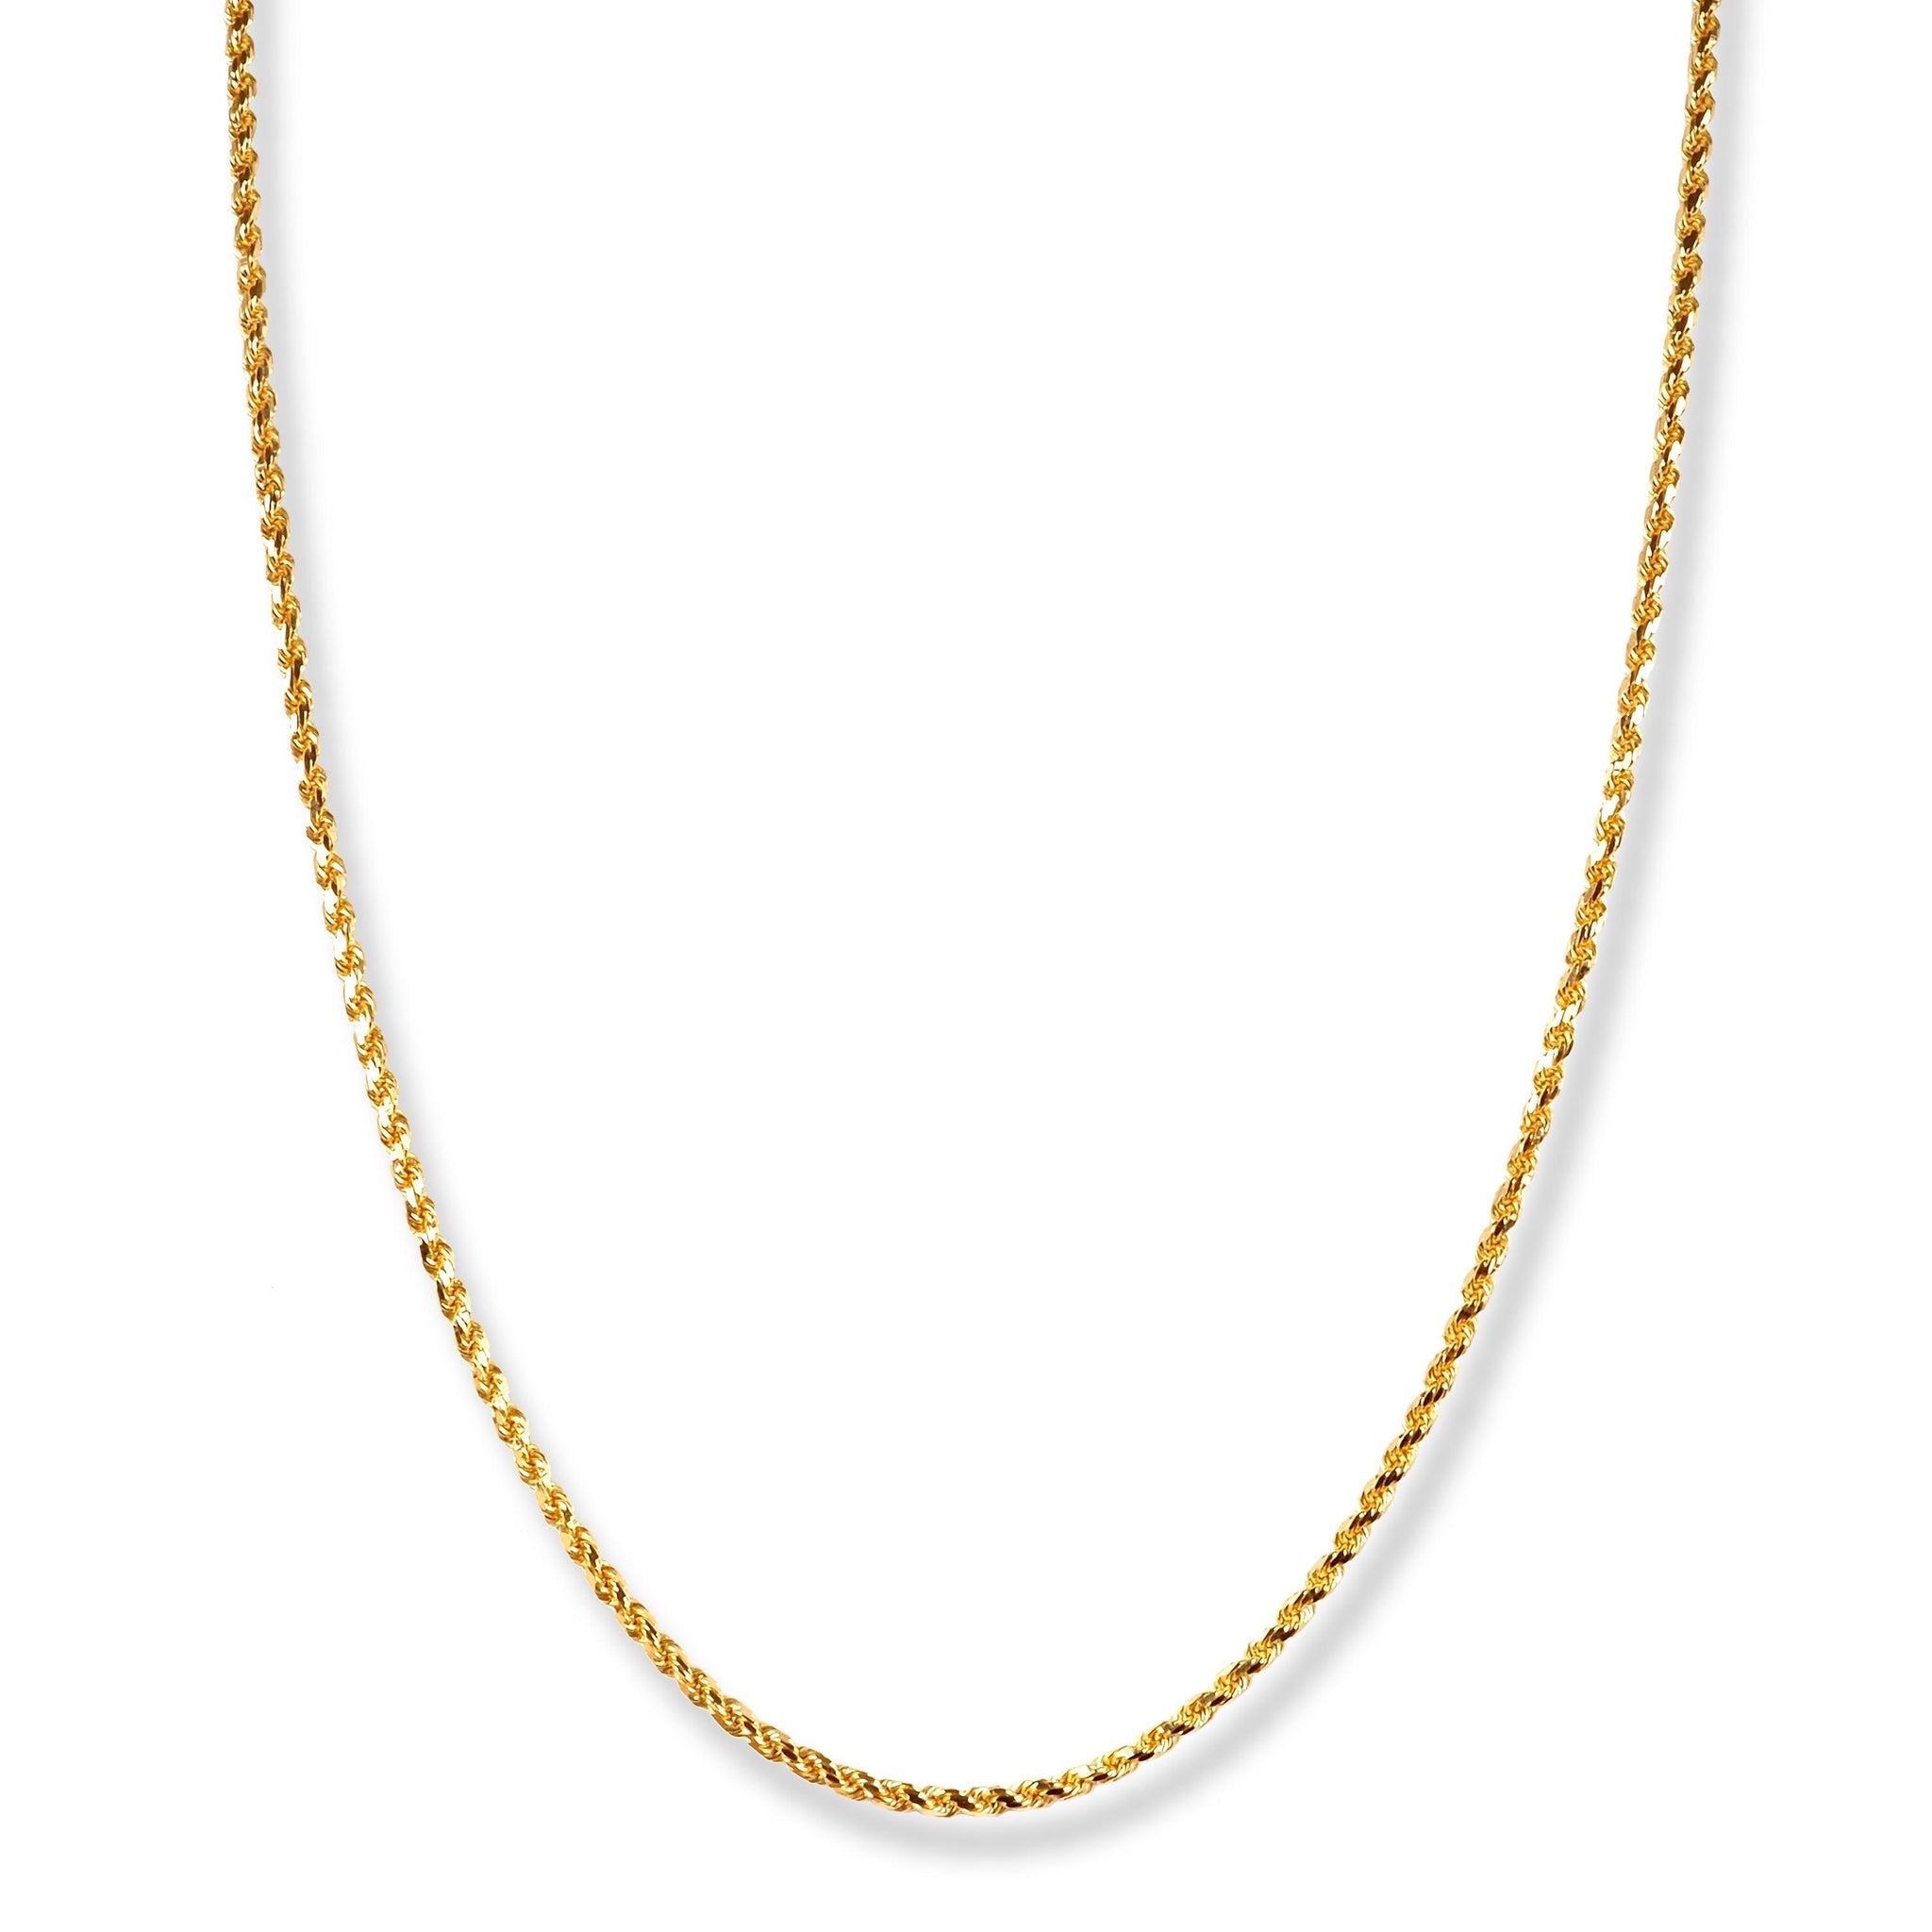 22ct Gold Filed Solid Rope Chain with Lobster Clasp C-1216